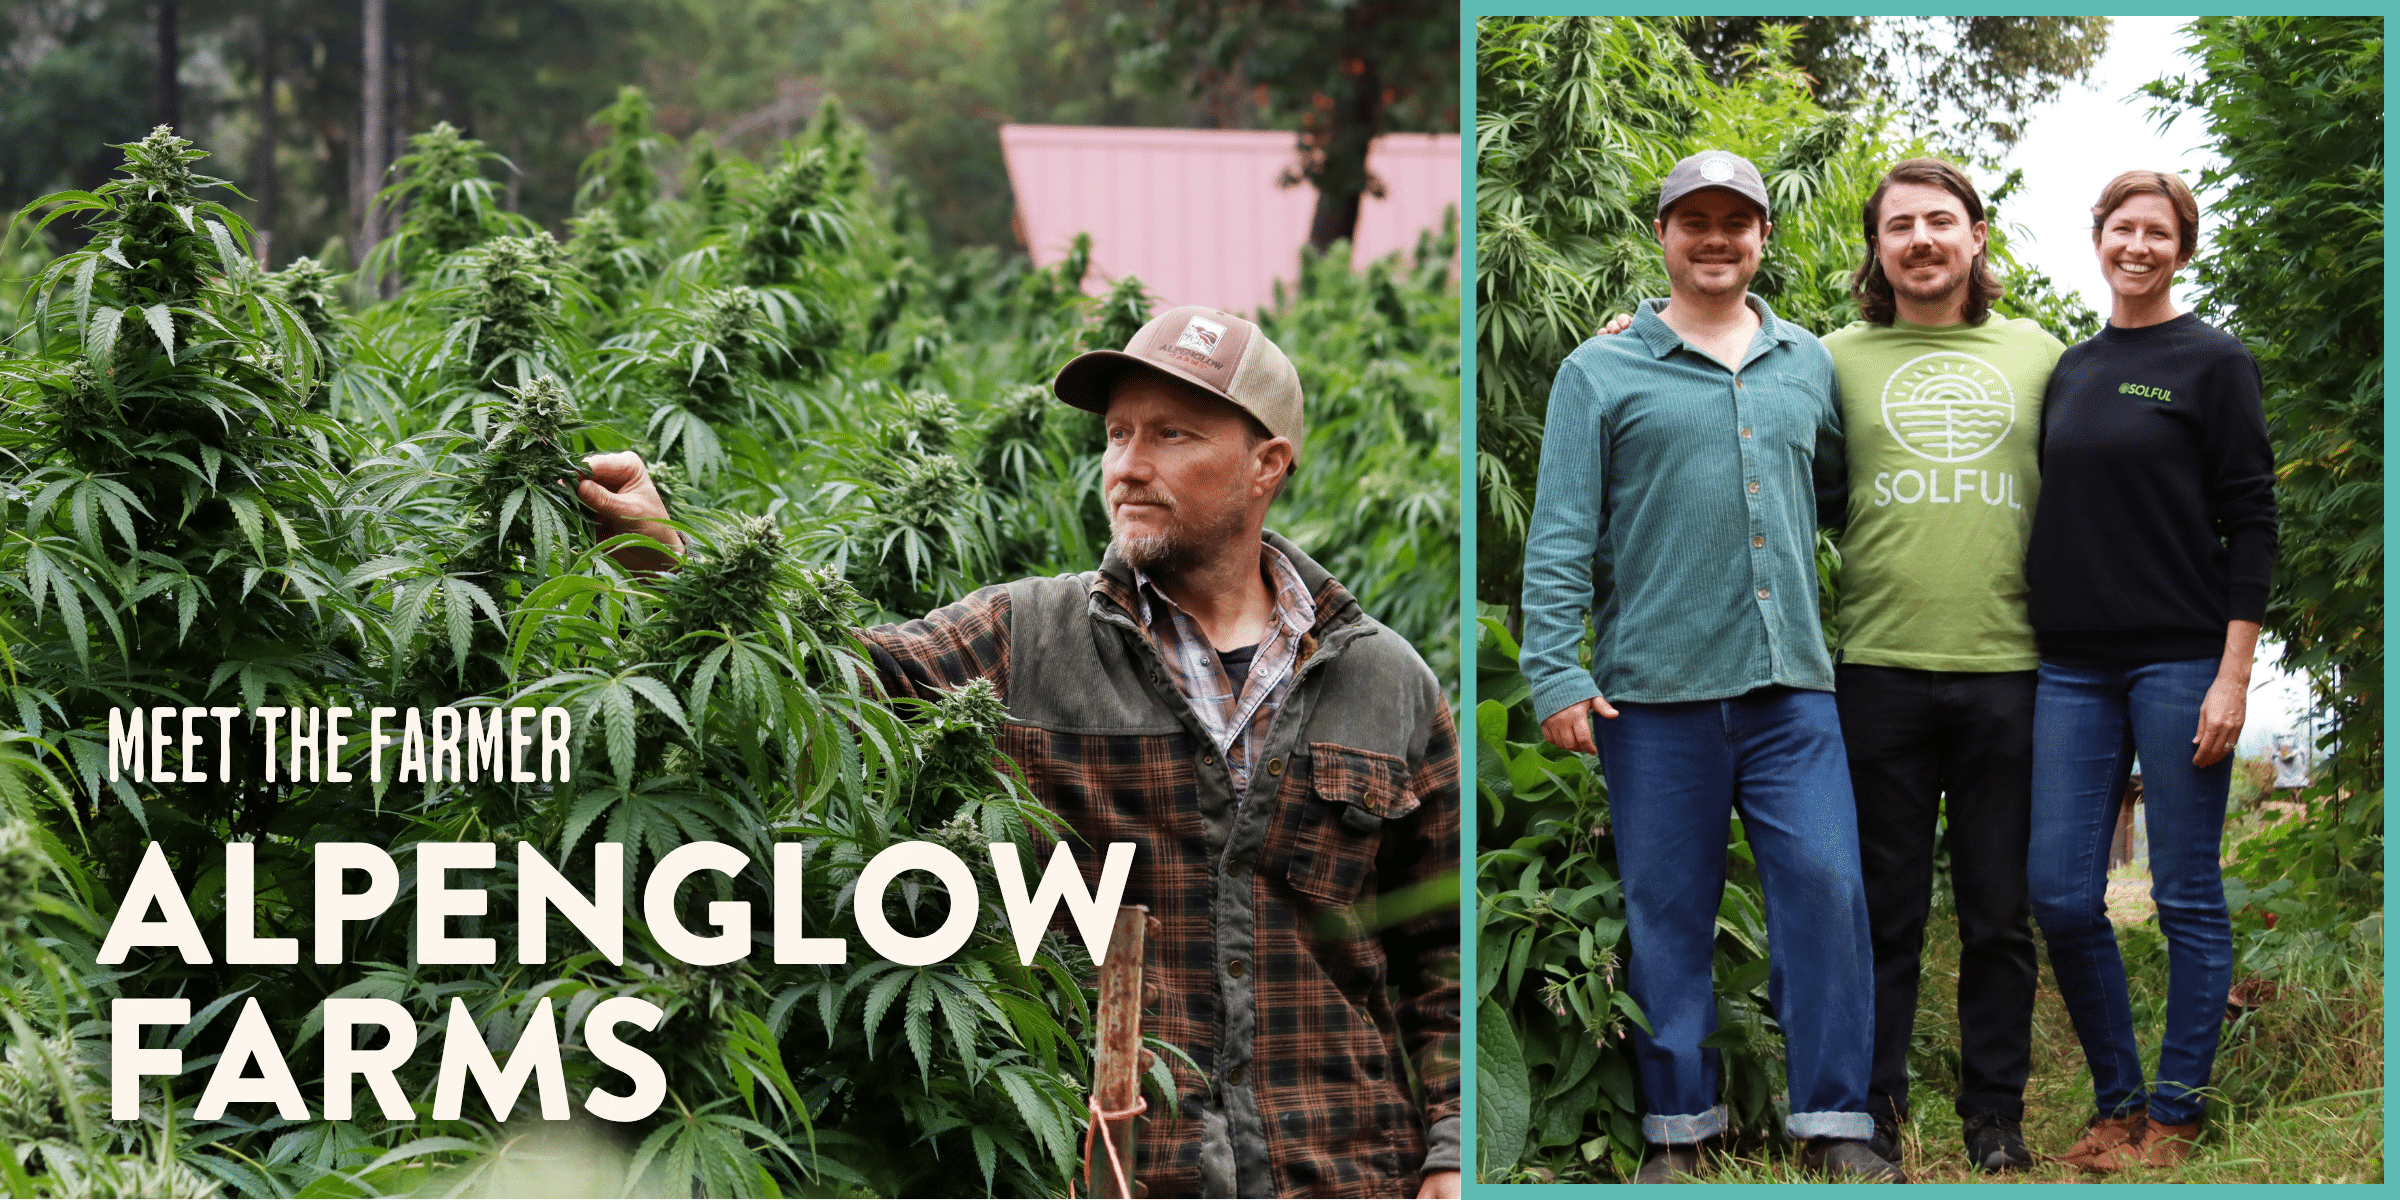 Left: Craig from Alpenglow Farms examines a cannabis plant. Right: Eli, Noah, and Summer from Alpenglow Farms pose together.